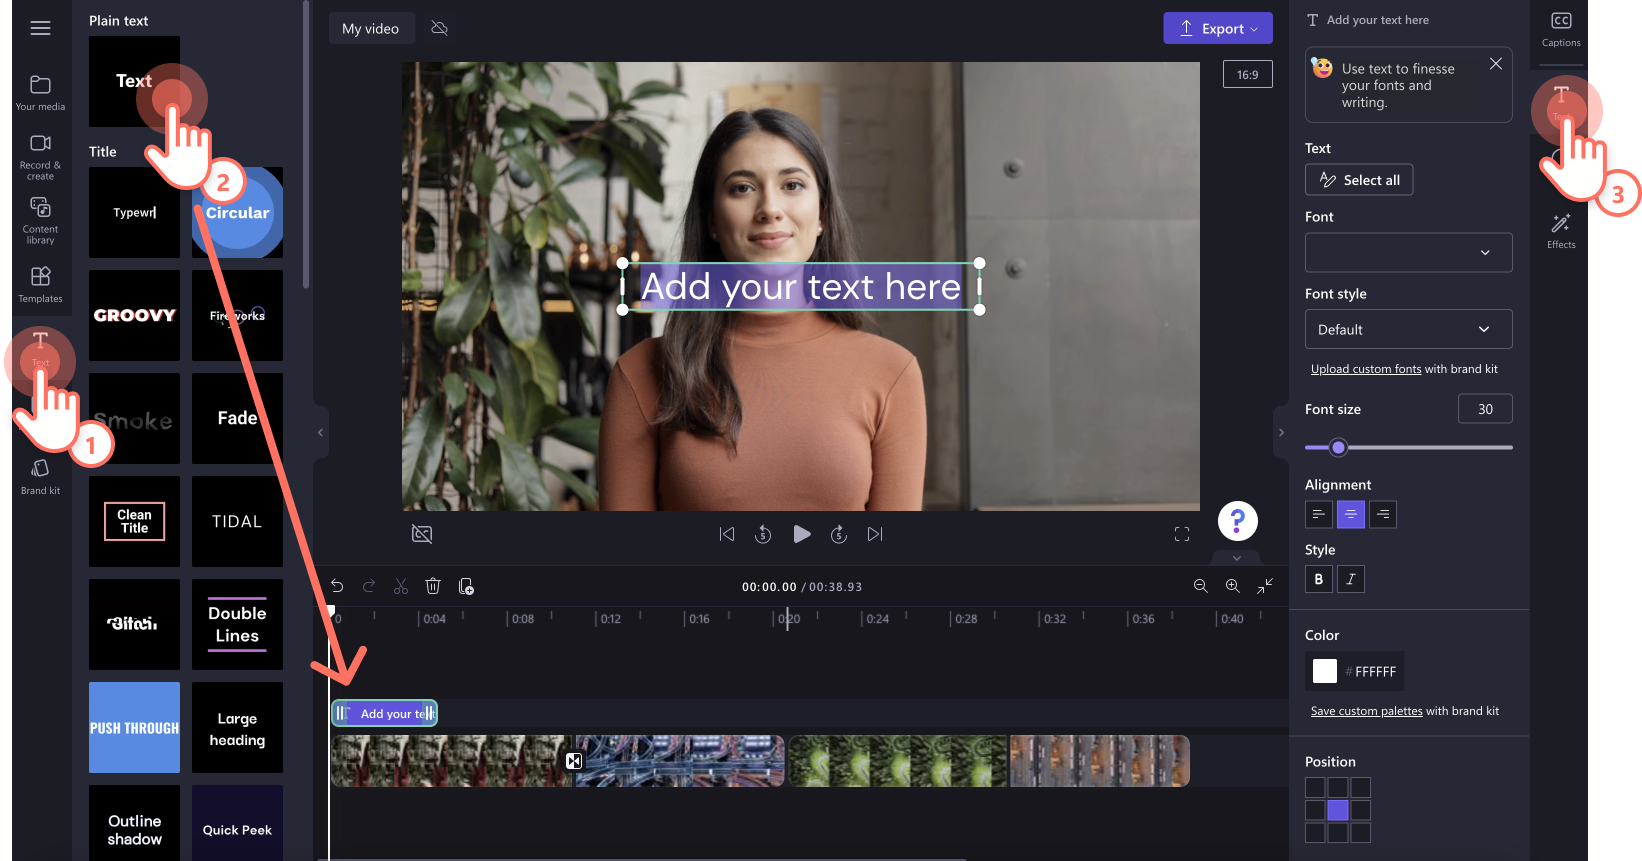 An image of a user adding text to the video.